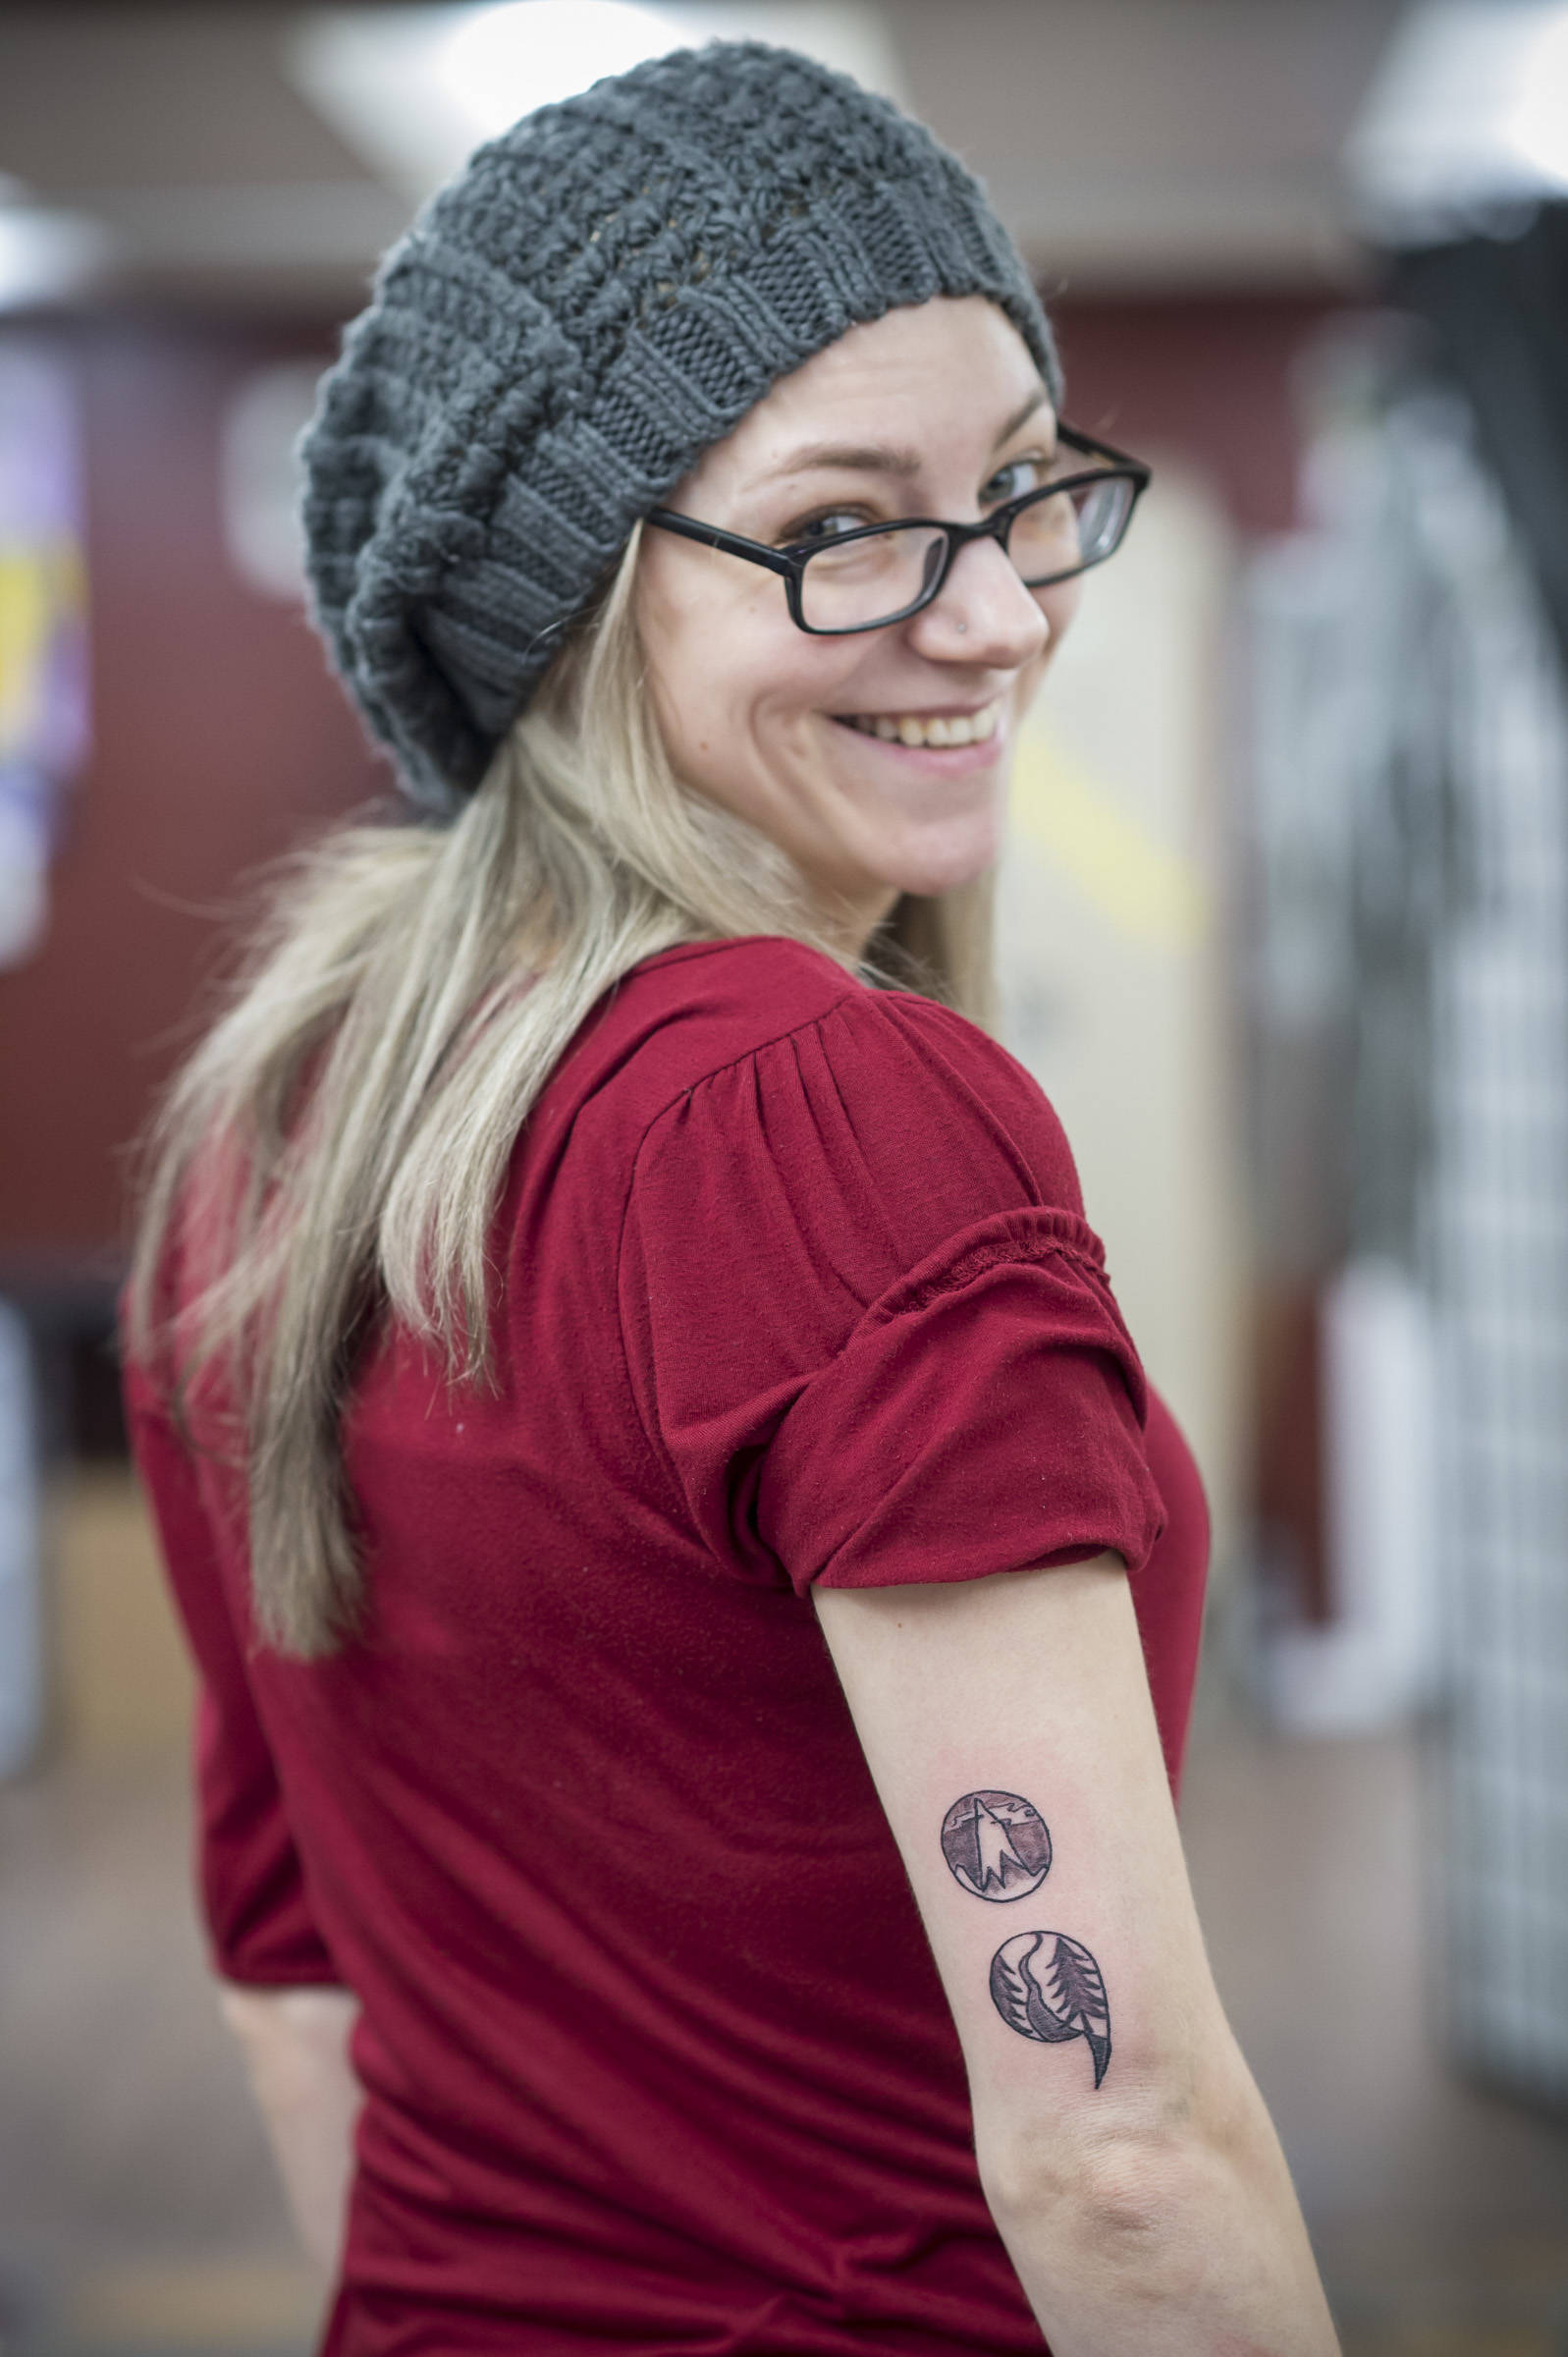 Amy Ridle displays her new stylized semicolon tattoo on her arm at Taku Tattoo on Monday, Nov. 19, 2018. (Michael Penn | Juneau Empire)